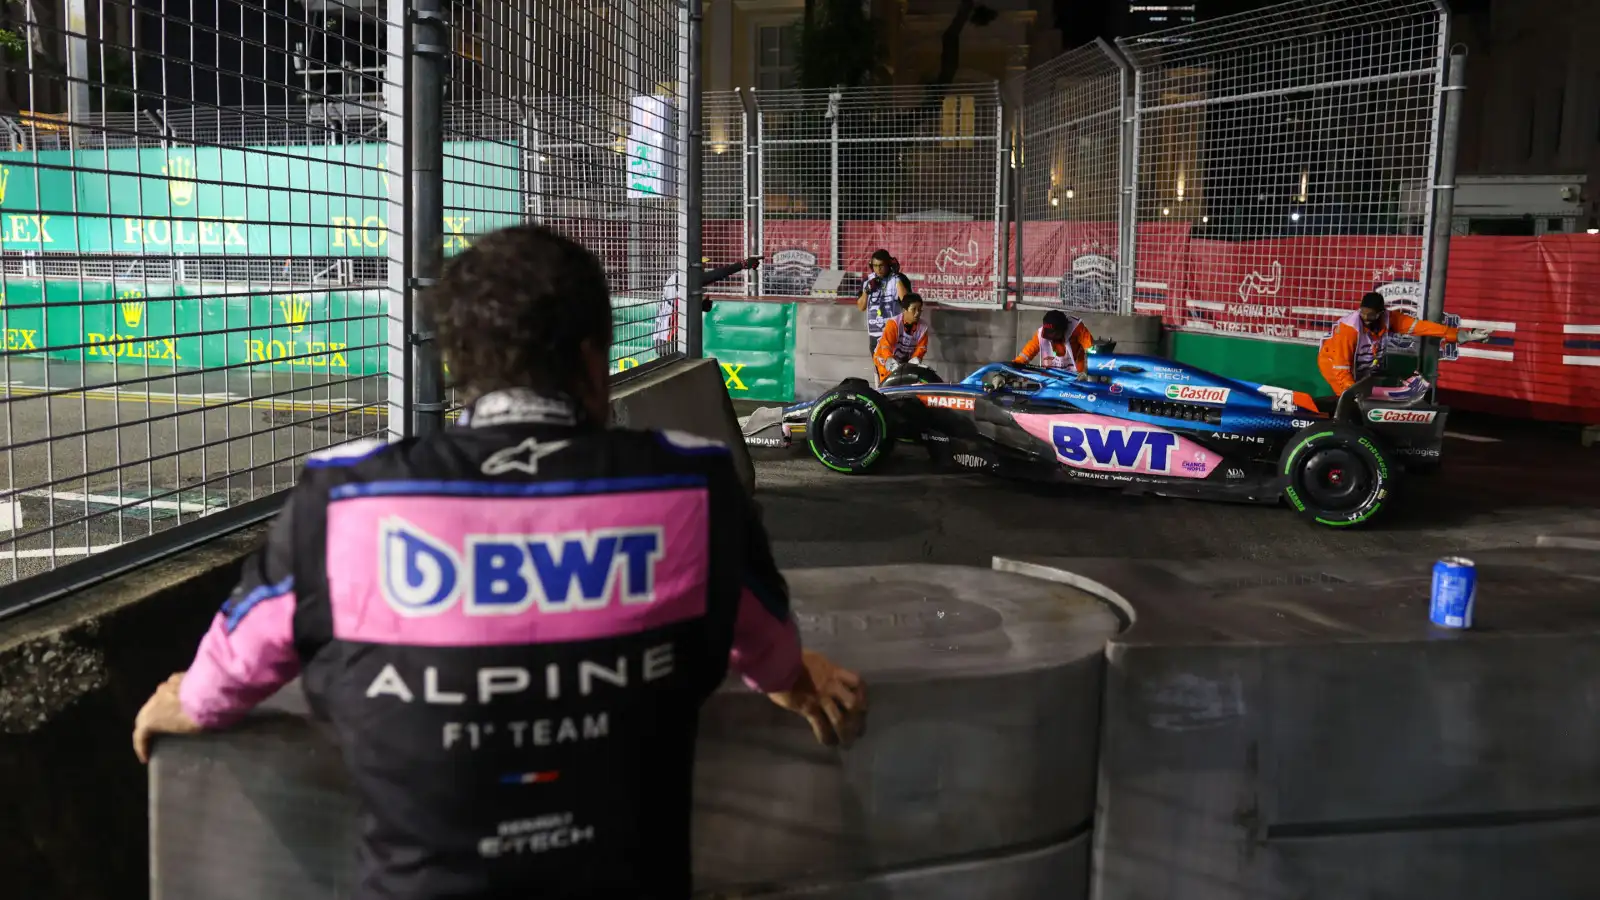 Alpine's Fernando Alonso watches on after retiring from the 2022 Singapore Grand Prix. Marina Bay, September 2022.